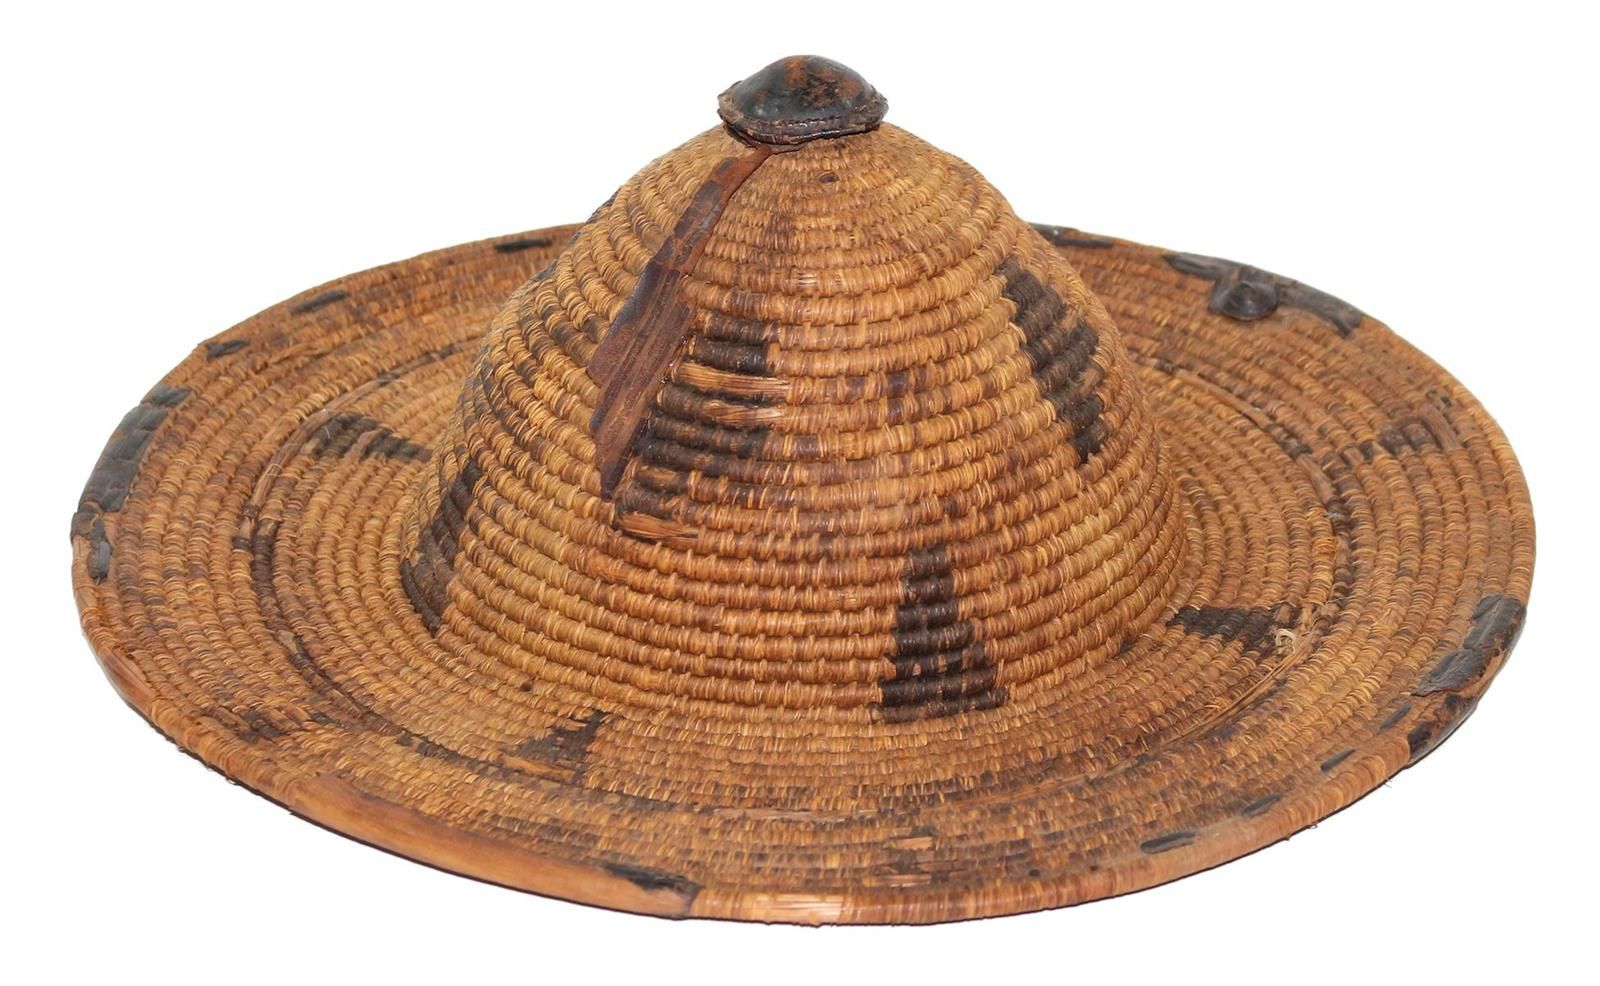 Kolonialzeit Basthut. Bell-shaped bas hat with brim probably 19th century. Remai&hellip;